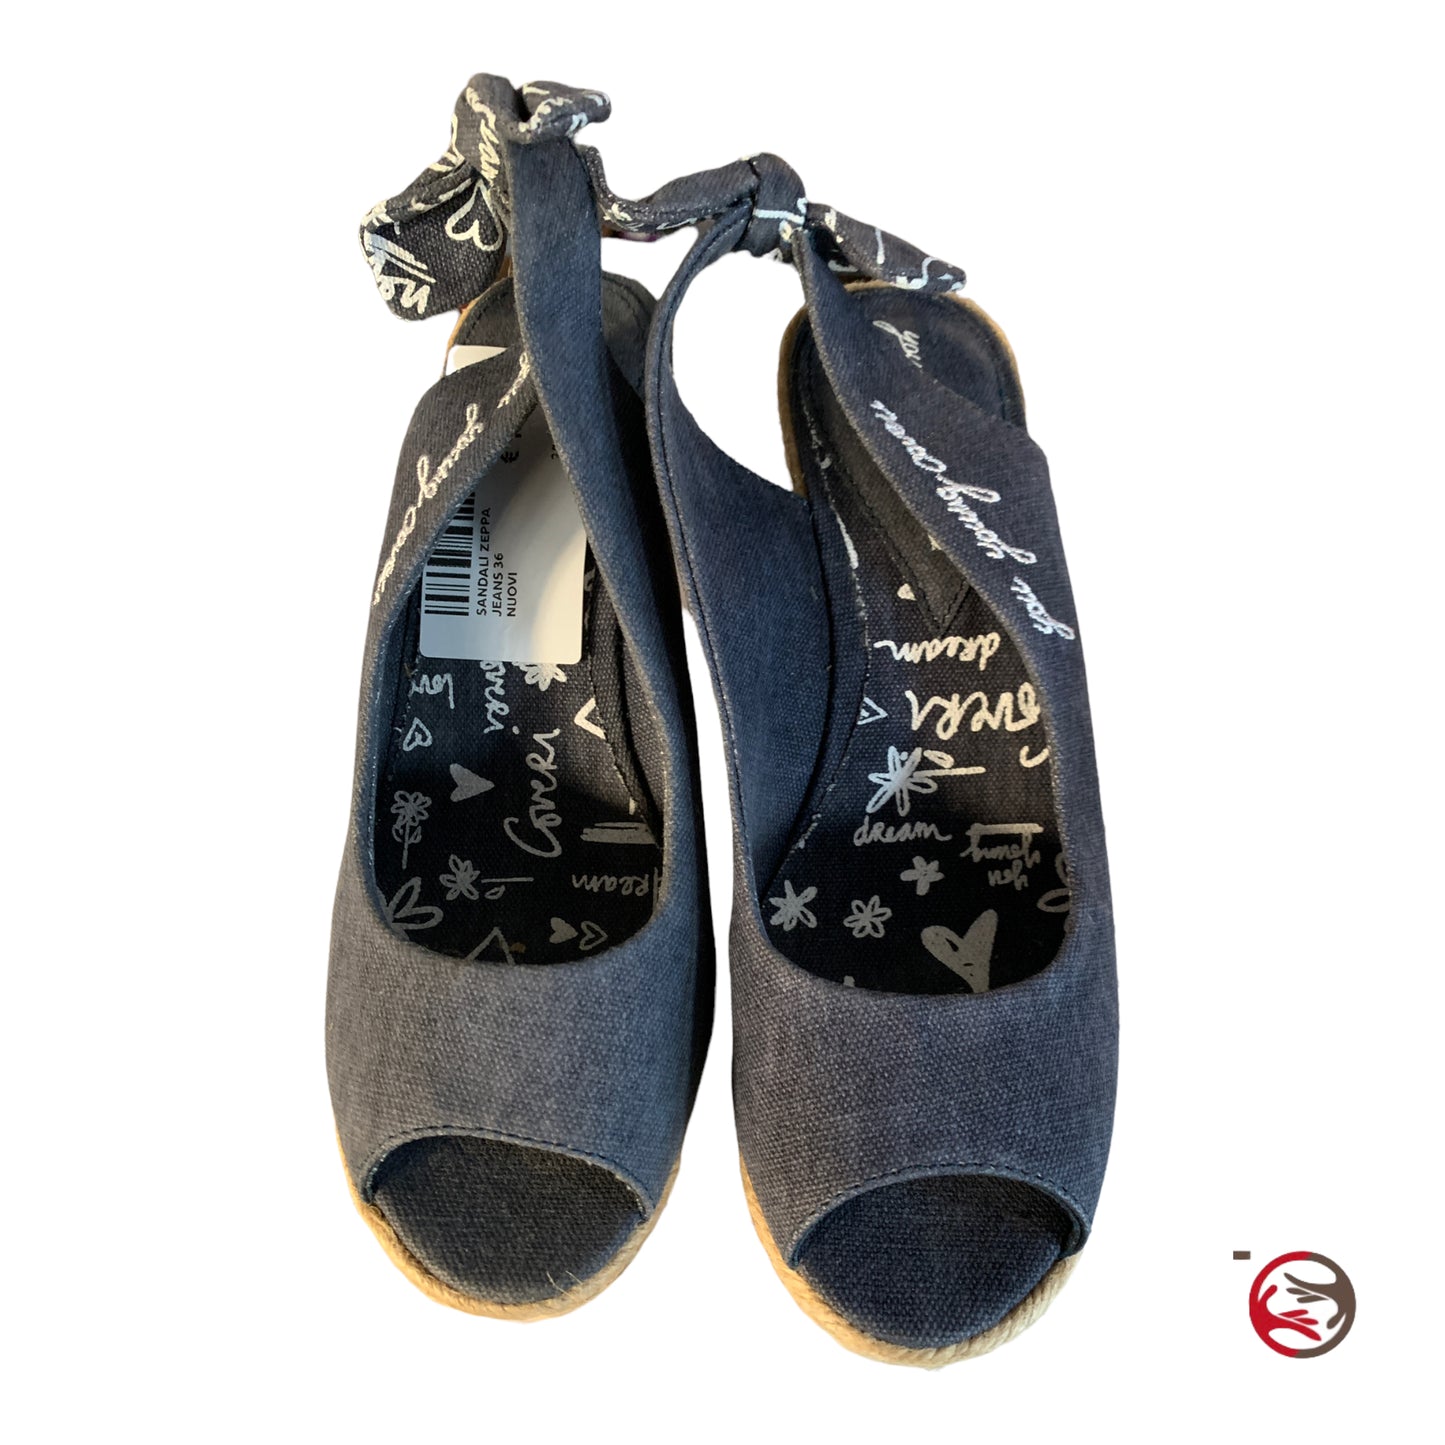 Jeans wedge sandals nr. 36 new